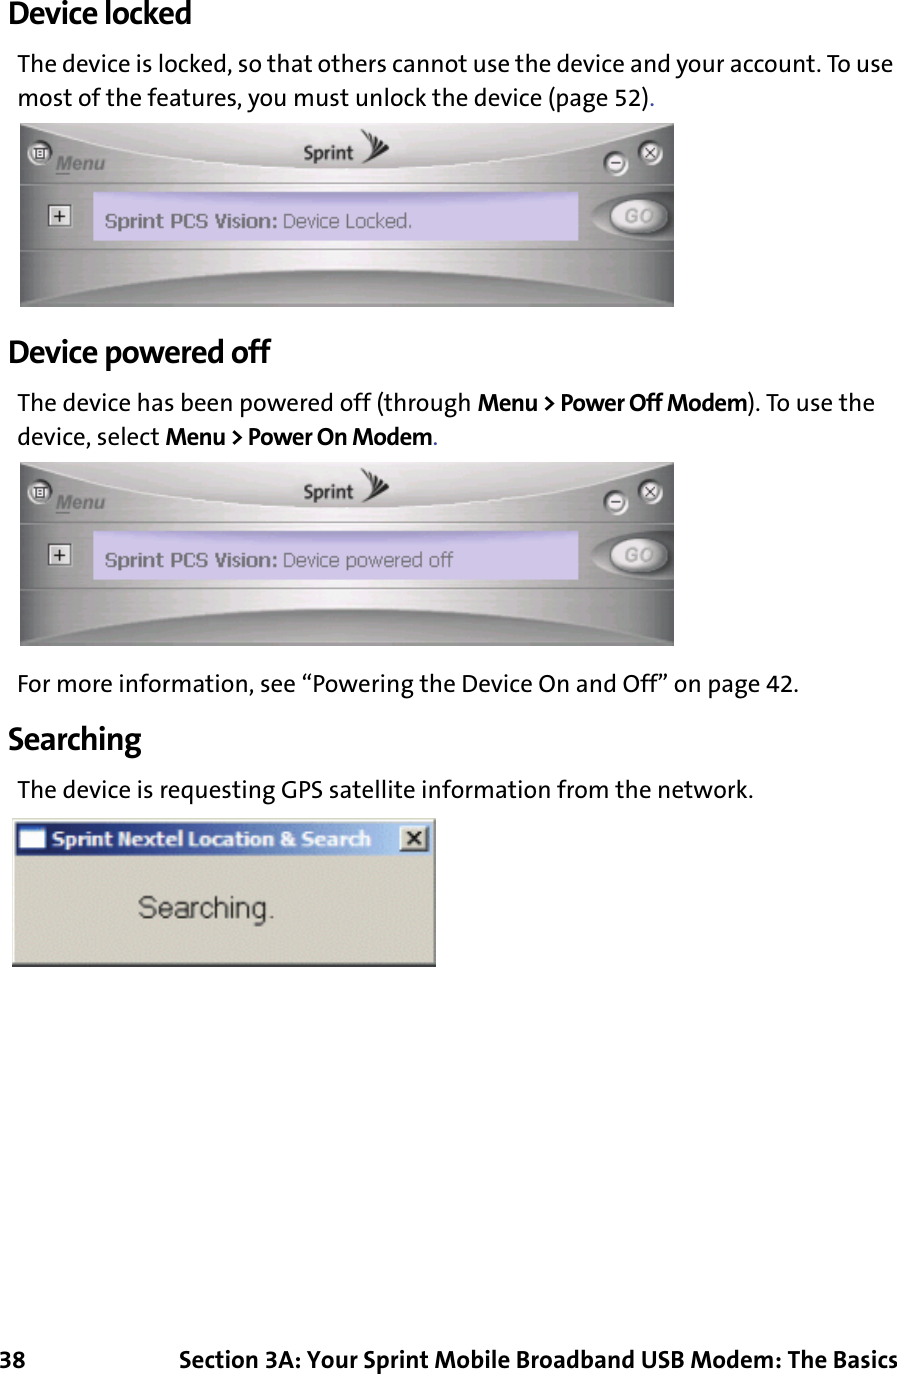 38 Section 3A: Your Sprint Mobile Broadband USB Modem: The BasicsDevice lockedThe device is locked, so that others cannot use the device and your account. To use most of the features, you must unlock the device (page 52).Device powered offThe device has been powered off (through Menu &gt; Power Off Modem). To use the device, select Menu &gt; Power On Modem.For more information, see “Powering the Device On and Off” on page 42.SearchingThe device is requesting GPS satellite information from the network.